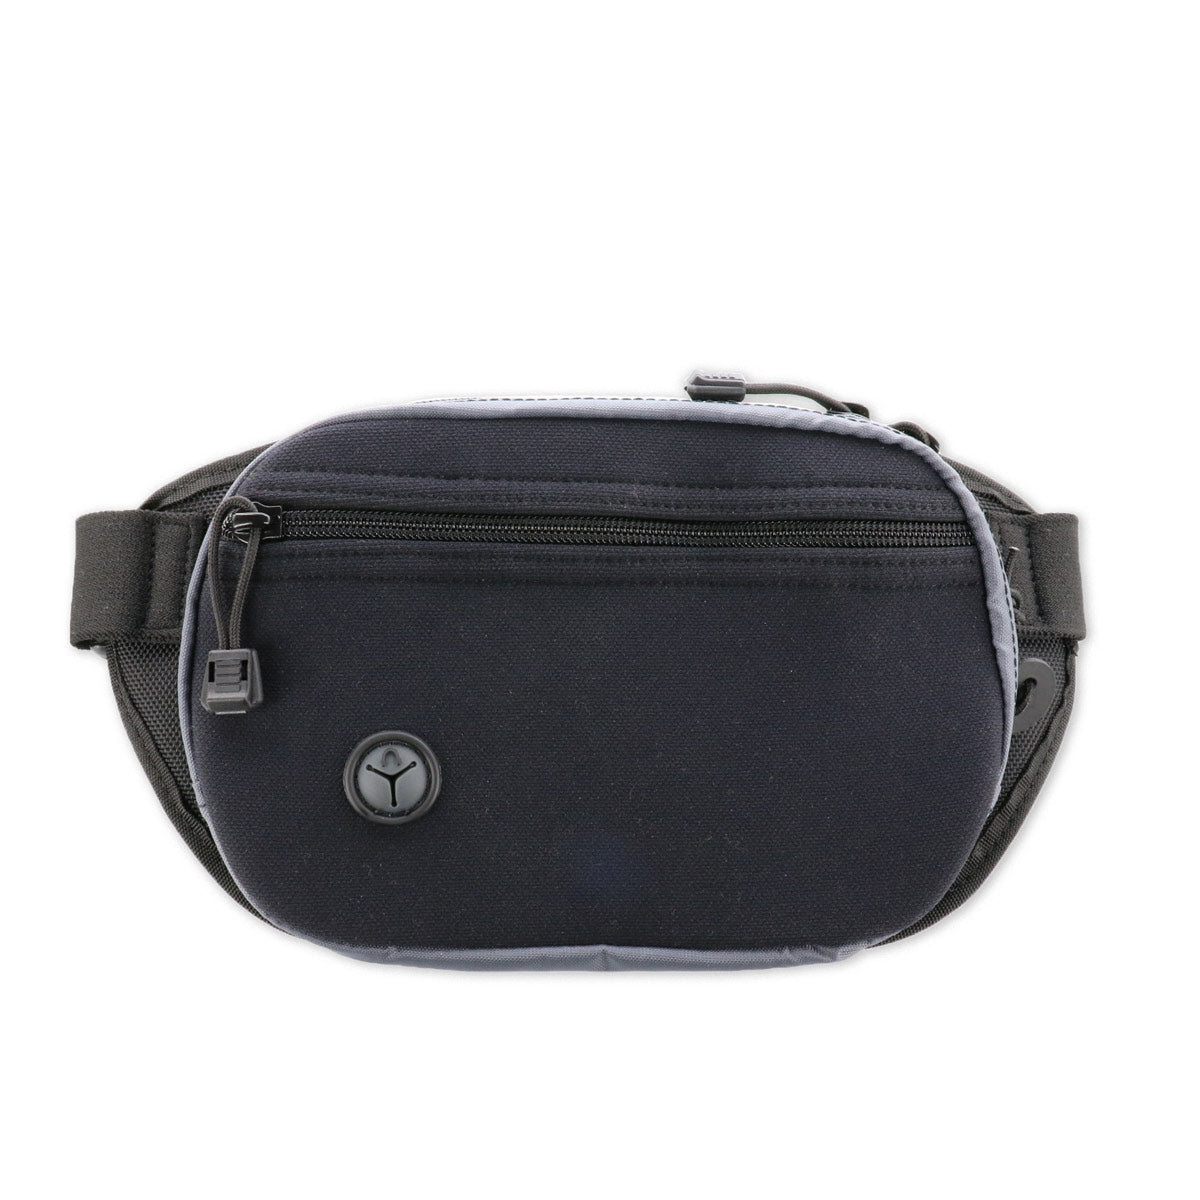 Galco Fastrax Pac Waistpack (COMPACT)